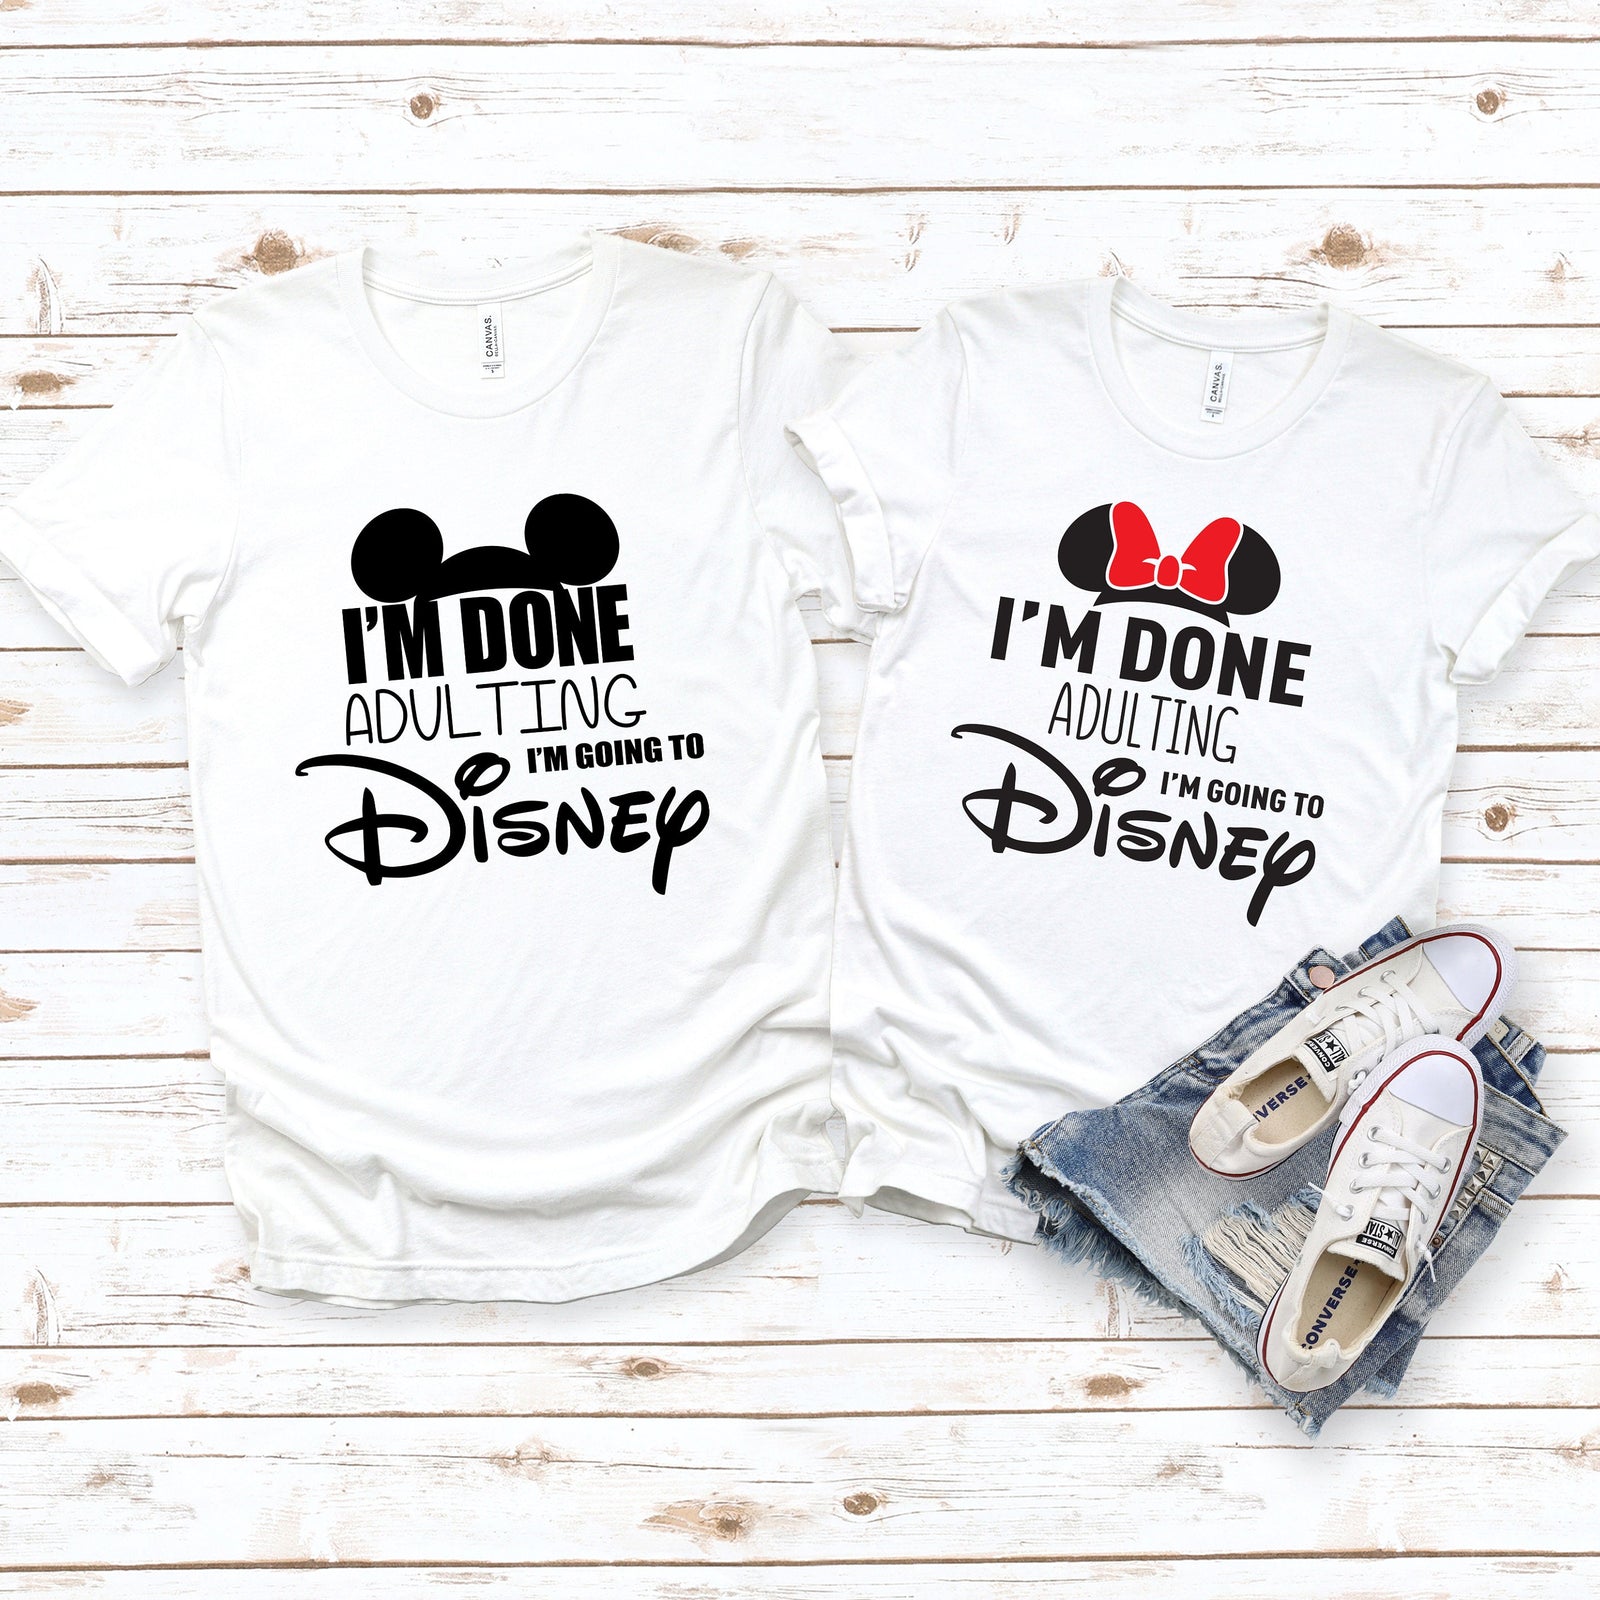 I'm Done Adulting Mickey and Minnie Mouse Shirts - Disney Couples - Matching Shirts - Minnie Mickey Couple Shirt